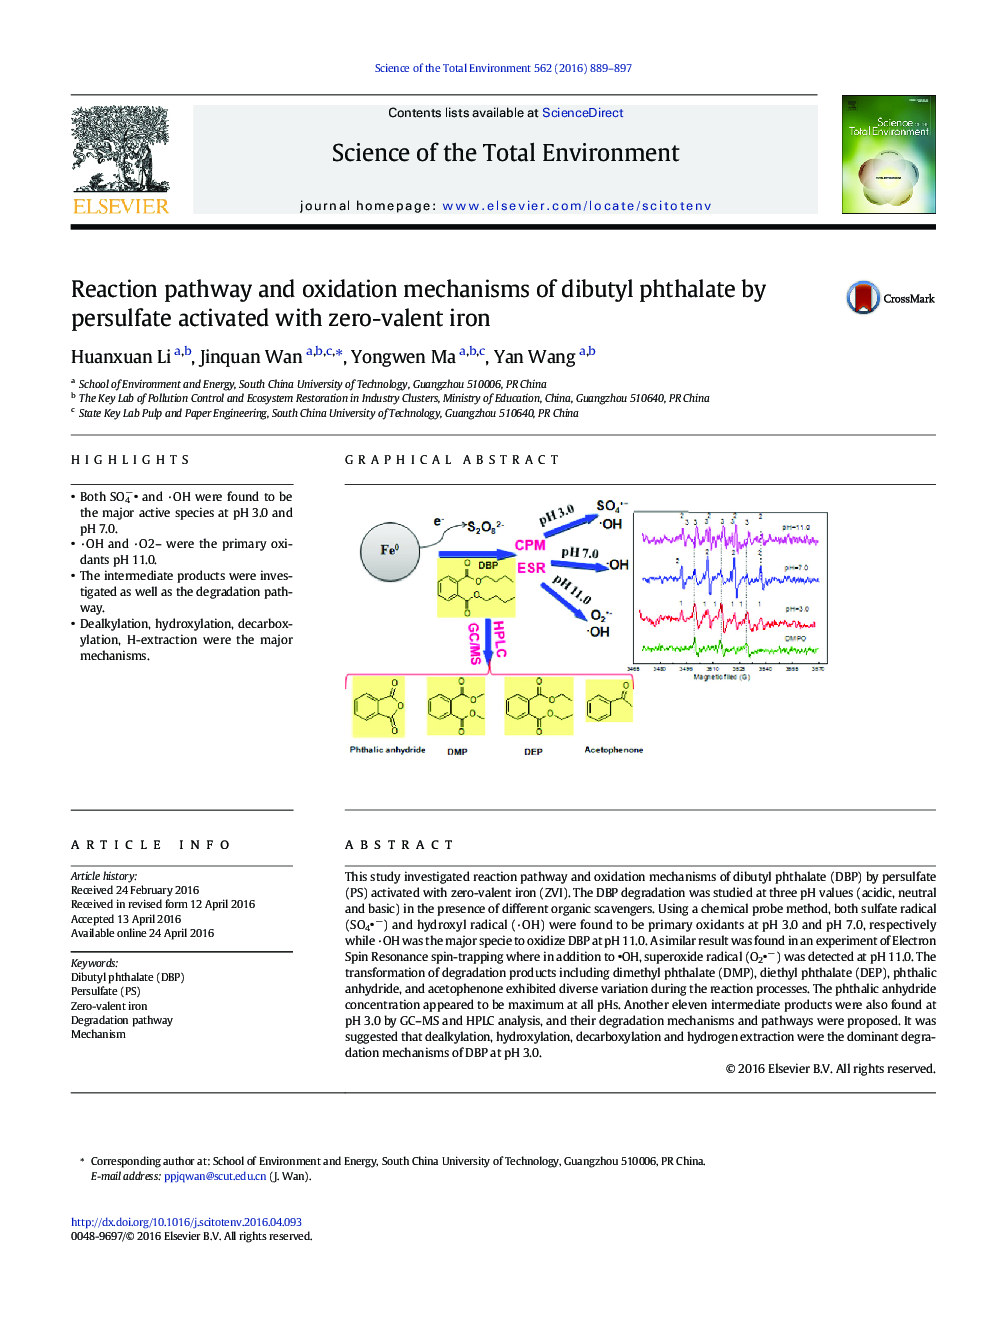 Reaction pathway and oxidation mechanisms of dibutyl phthalate by persulfate activated with zero-valent iron